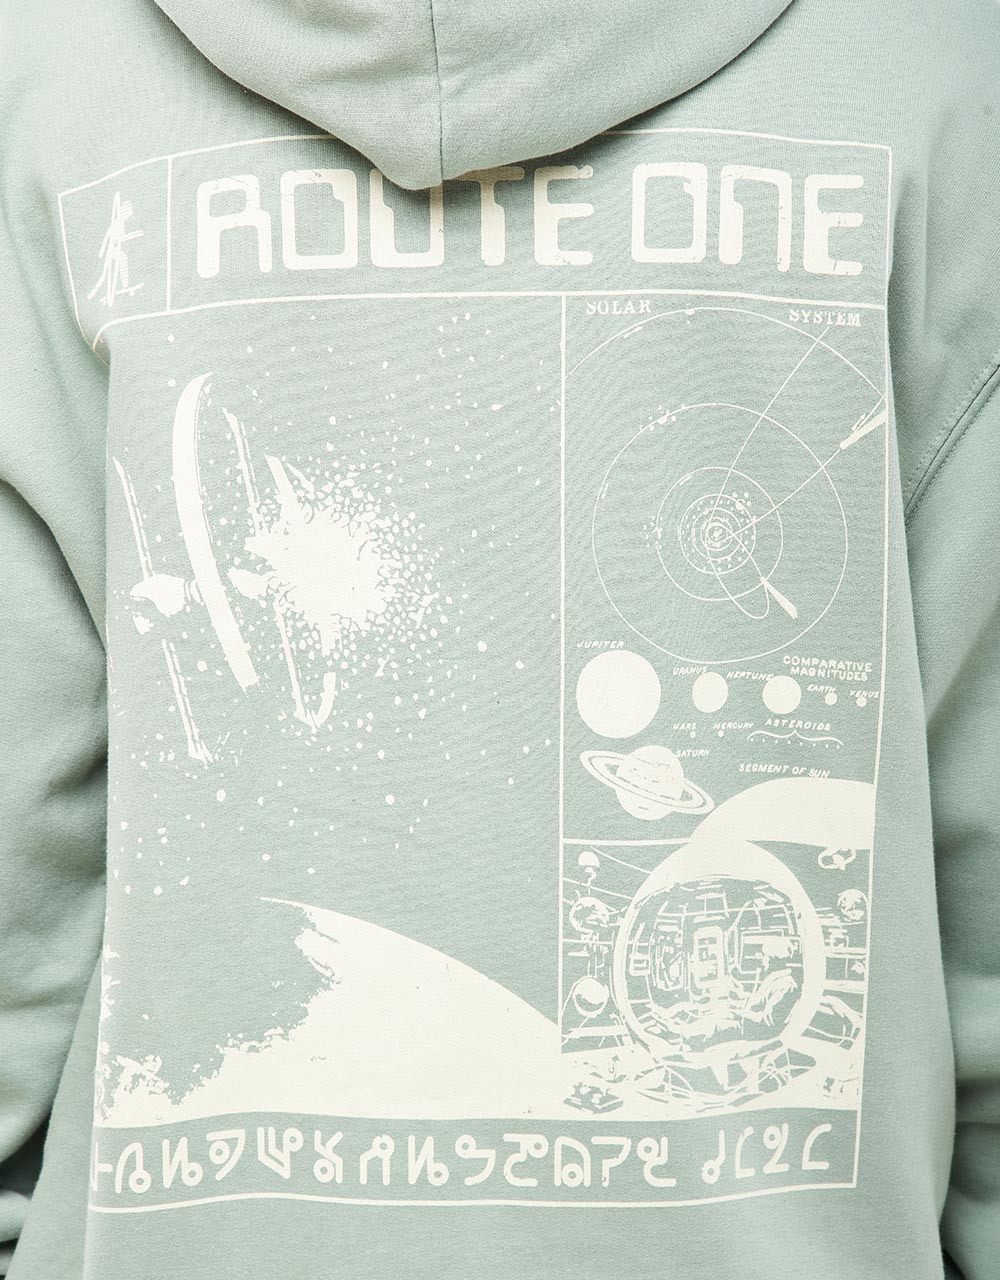 Route One Final Frontier Pullover Hoodie - Dusty Green